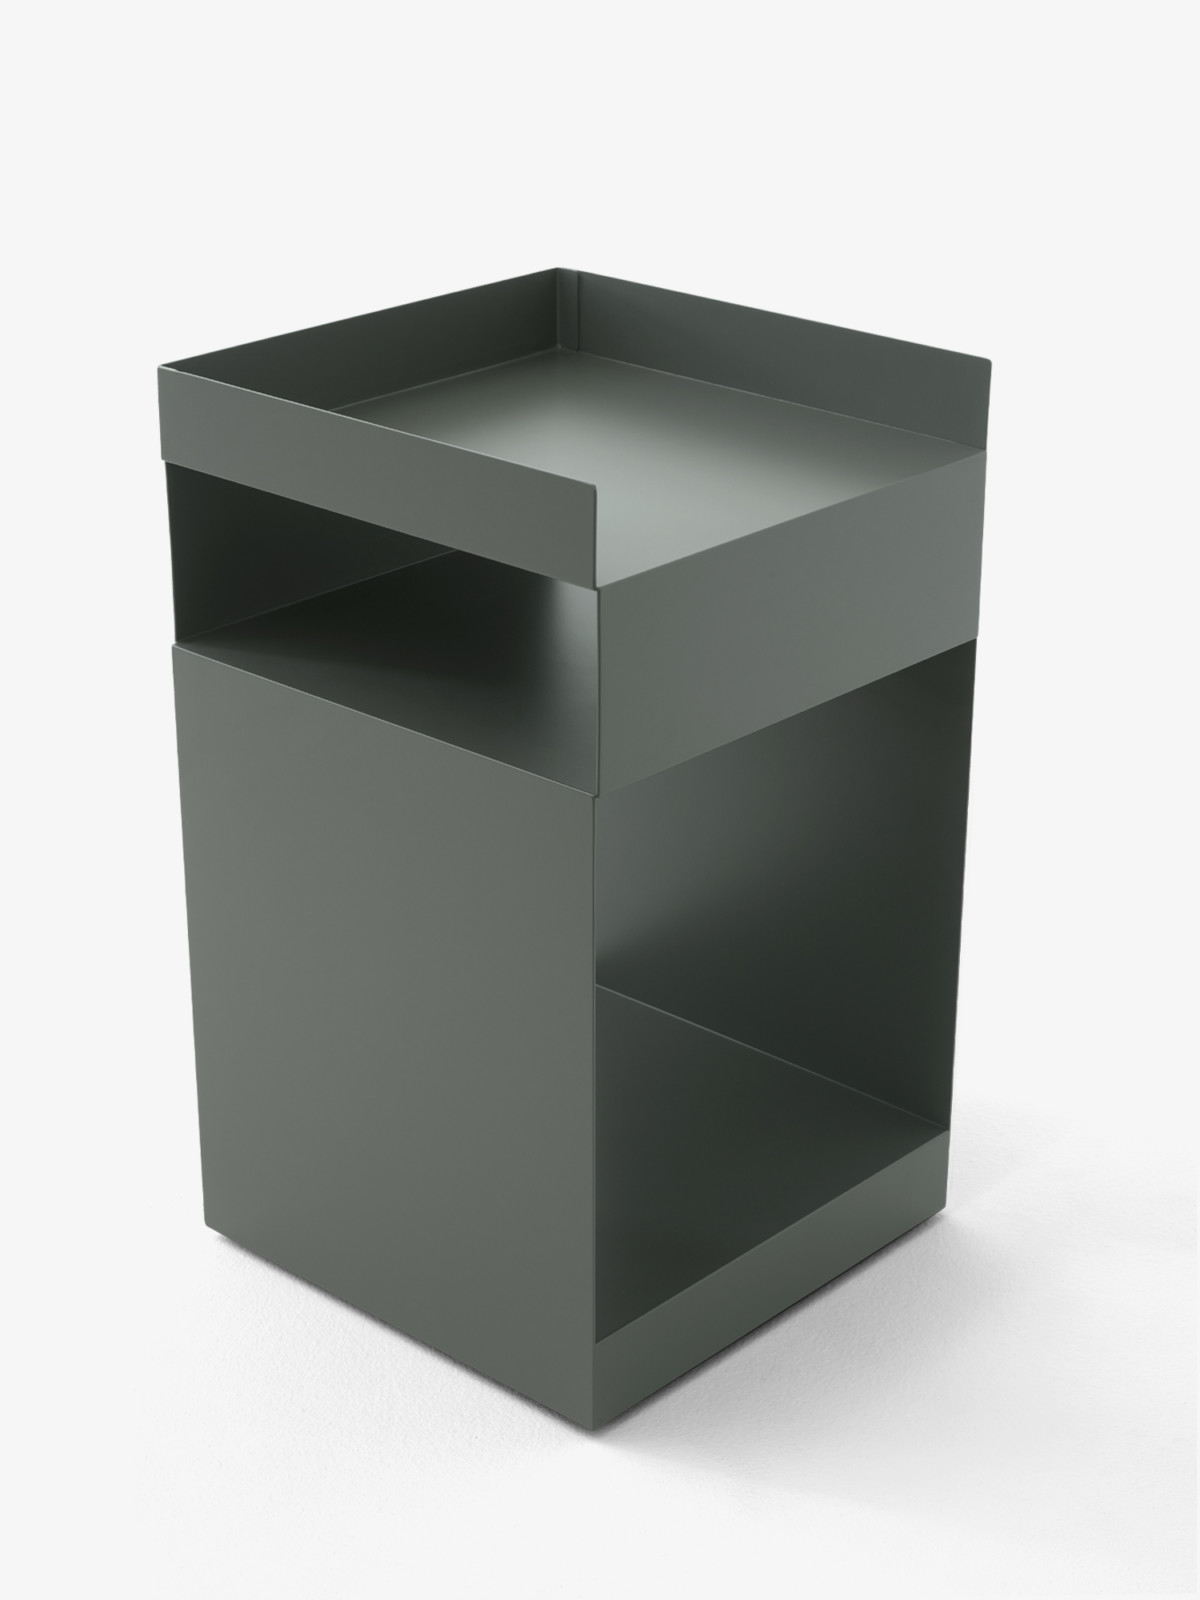  Tradition - Rotate SC73 Side table